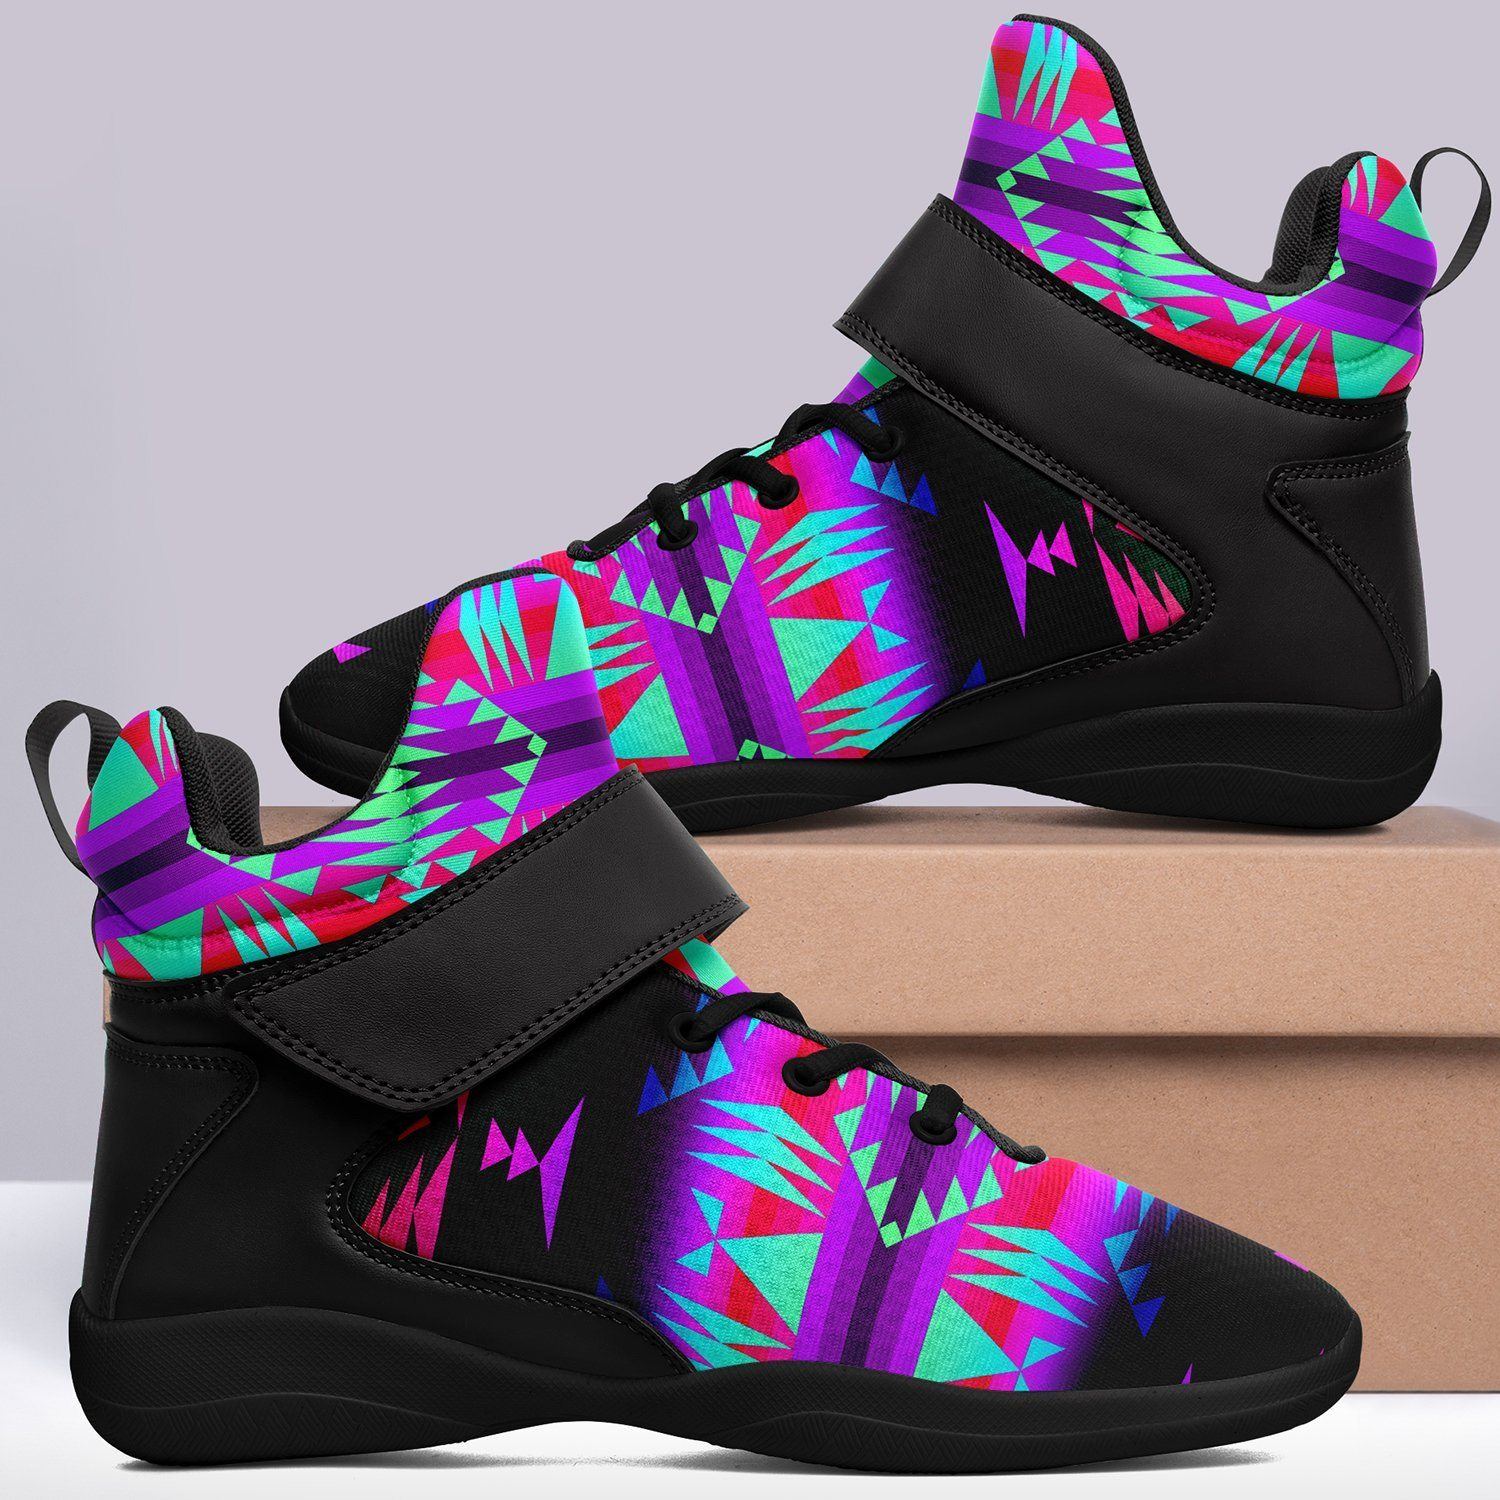 Between the Rocky Mountains Ipottaa Basketball / Sport High Top Shoes - Black Sole 49 Dzine 